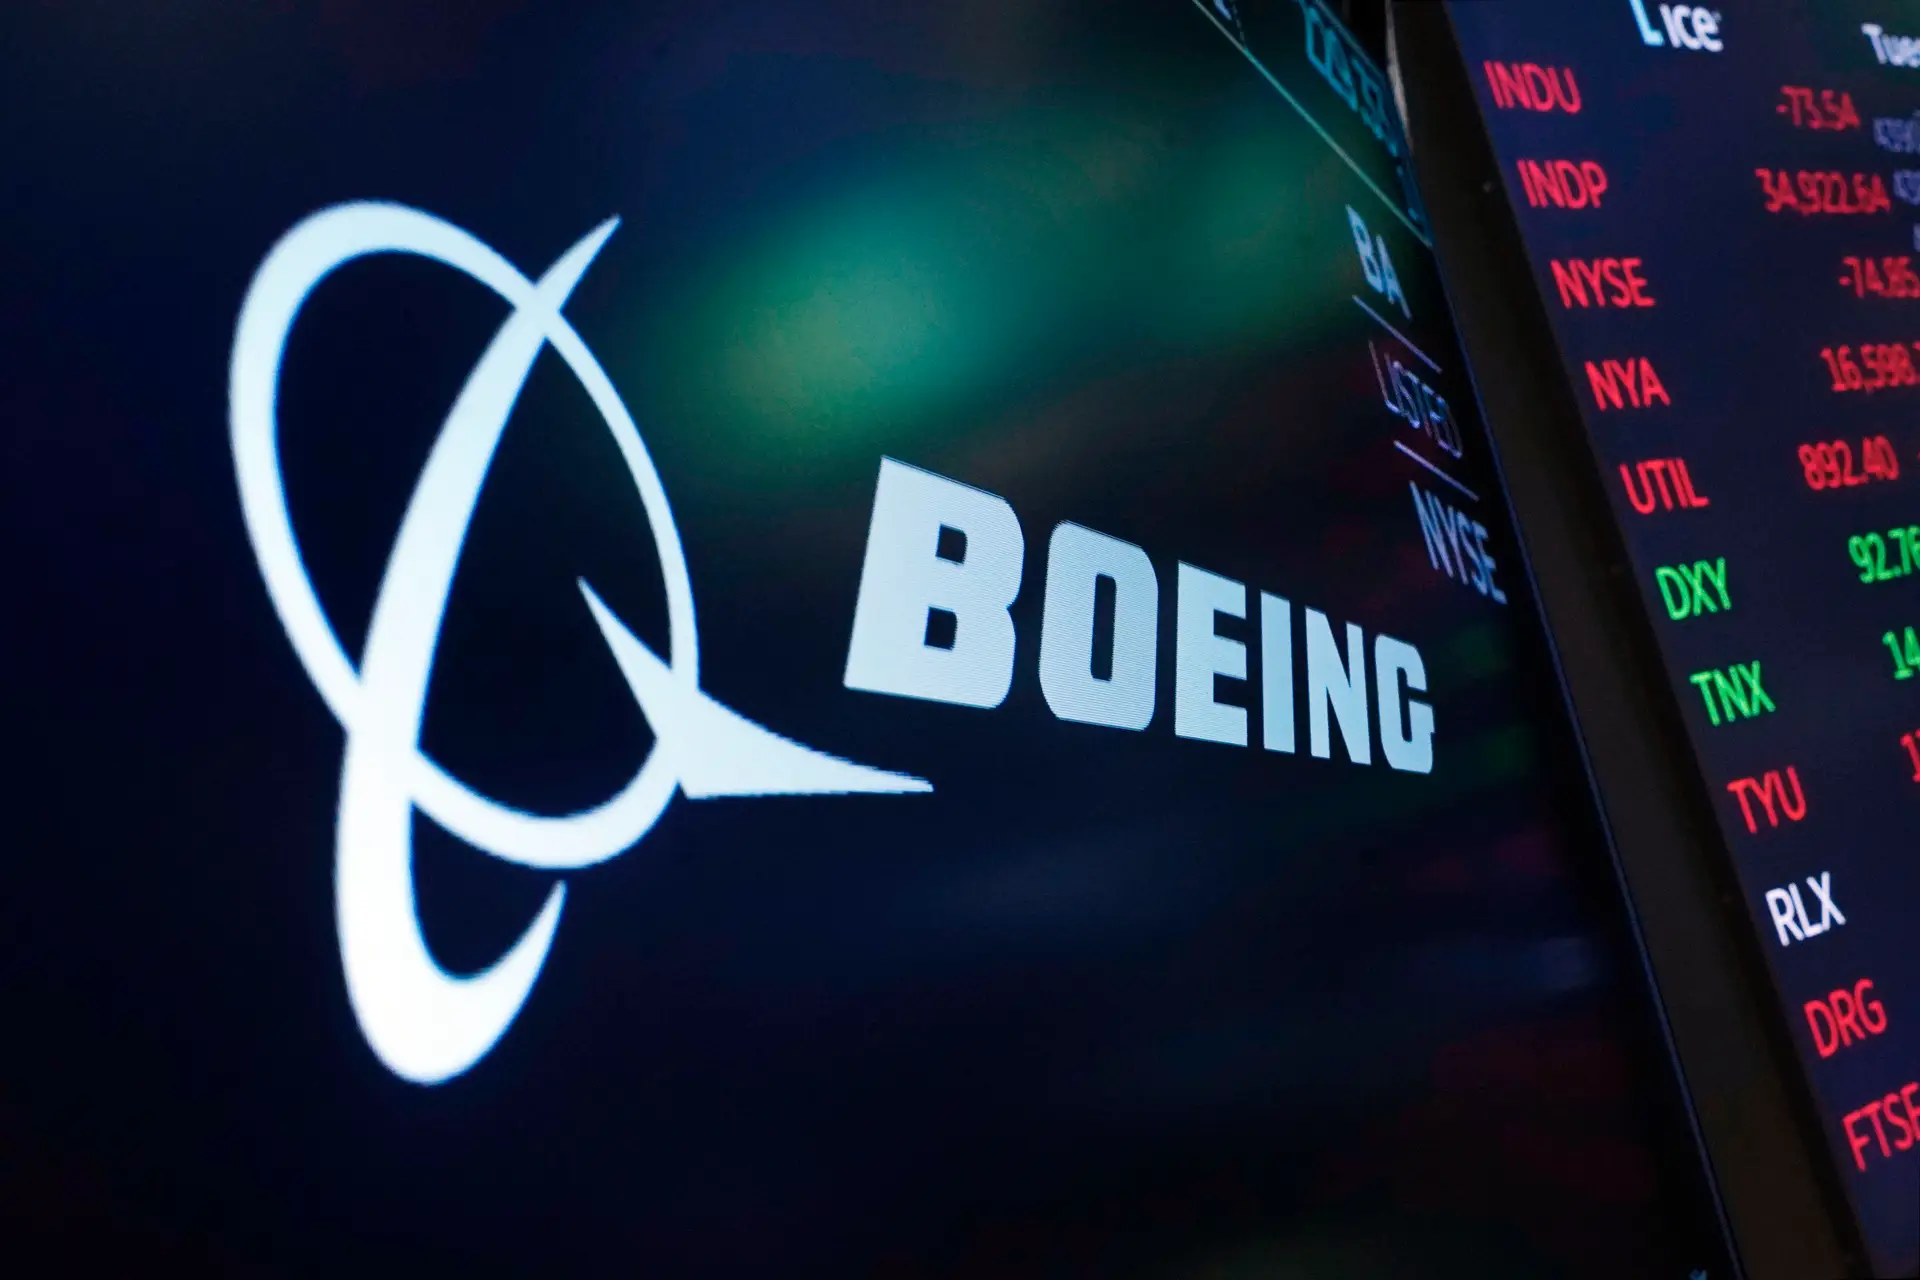 Boeing sets the date for the first manned flight to the International Space Station in May